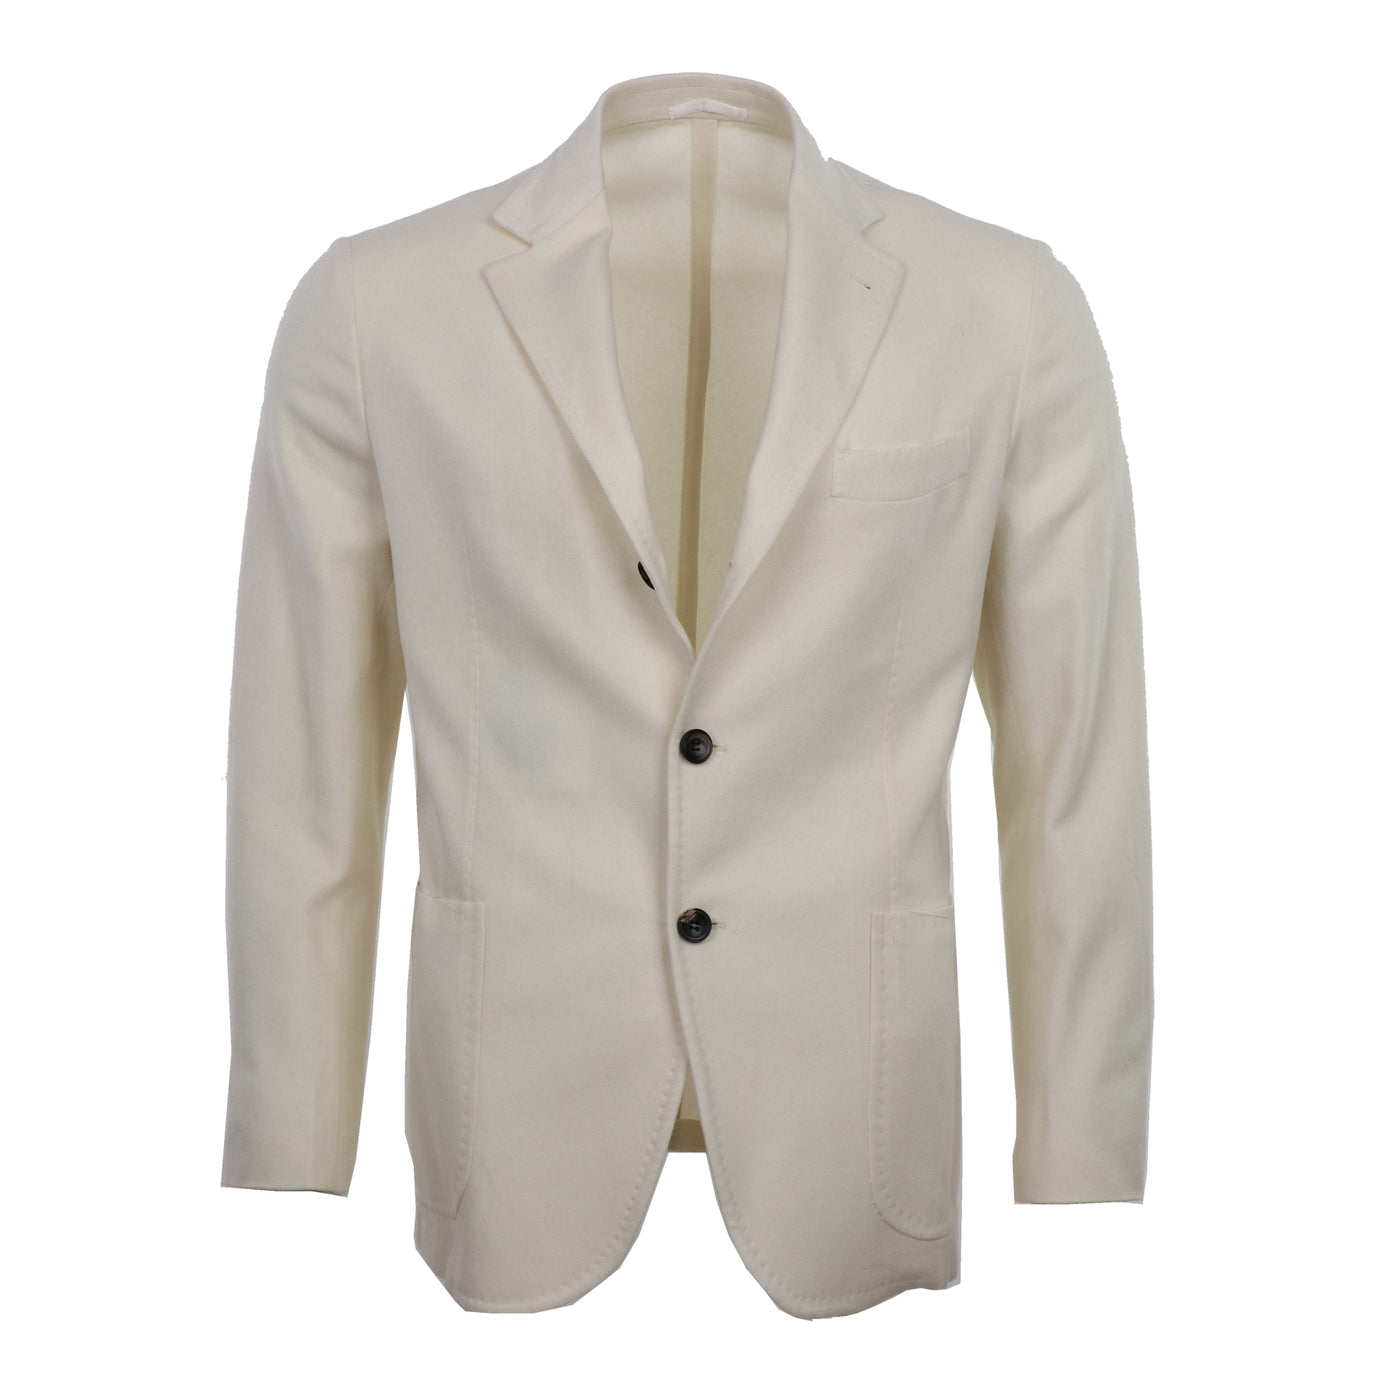 Summer Cashmere Soft Coat in Ivory Size 42R